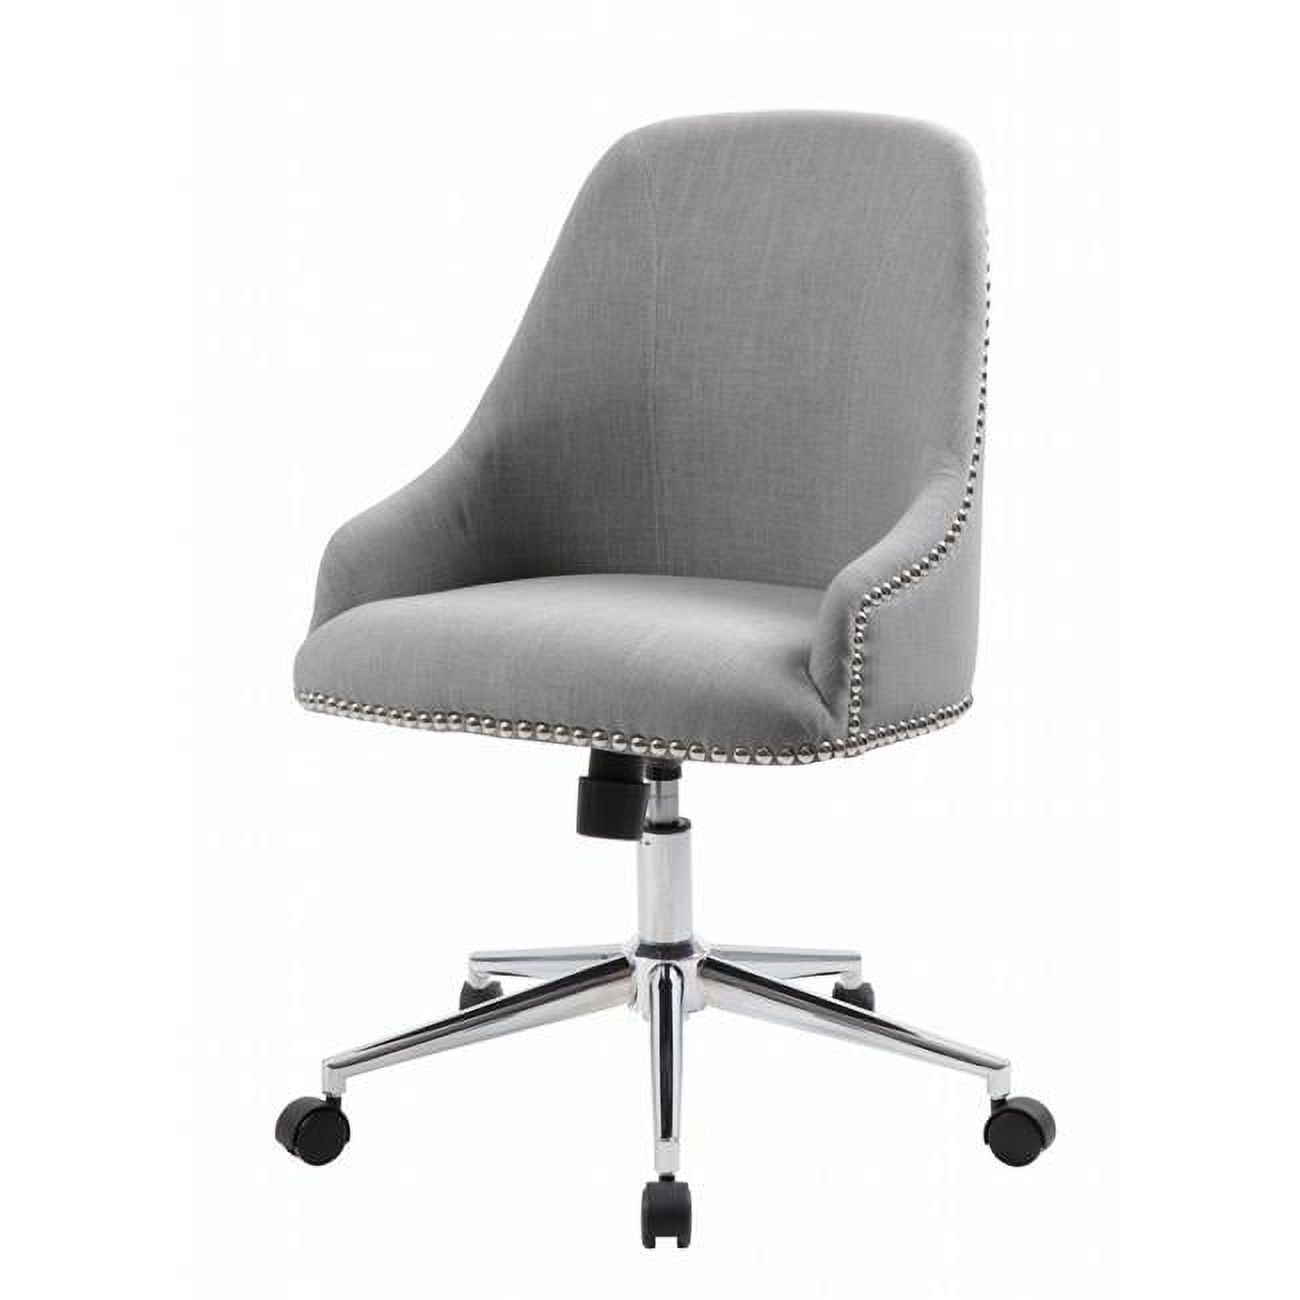 Picture of Norstar B516C-GY Grey Chair with Silver Nail Around Back & Arm, Kd074 Base